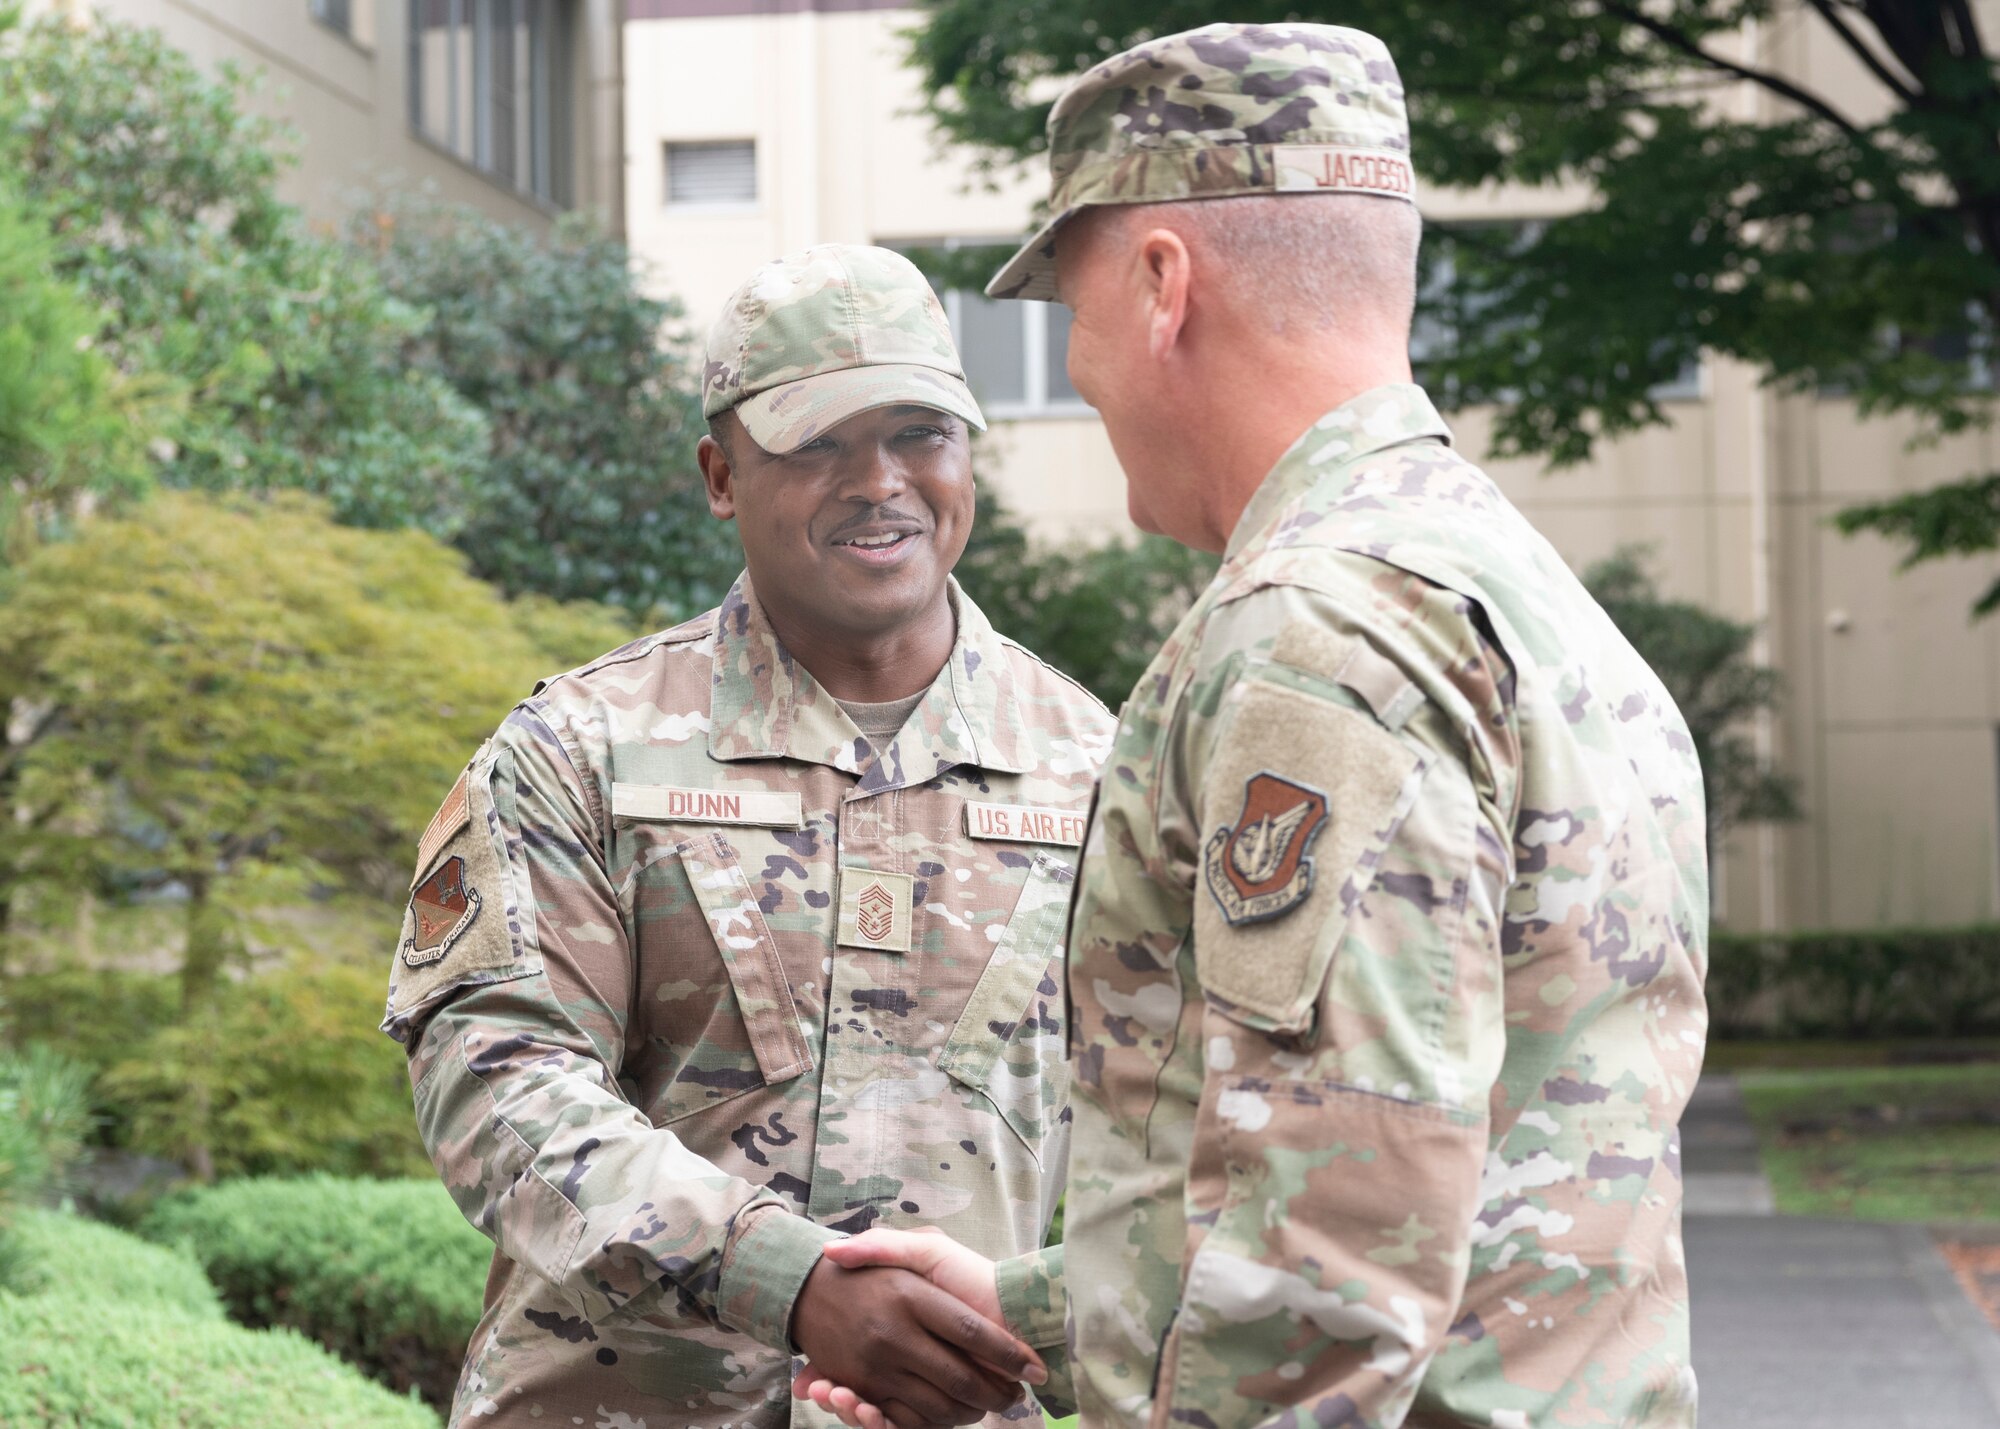 Chief Master Sgt. Jerry Dunn, 374th Airlift Wing command chief, greets Lt. Gen. James Jacobson, Pacific Air Forces deputy commander, during his visit to 374th Airlift Wing headquarters at Yokota Air Base, Japan, Aug. 22, 2022. During his visit, Jacobson met with Airmen and discussed the strategic capabilities, operations tempo and future plans for Yokota. (U.S. Air Force photo by Arita Machiko)